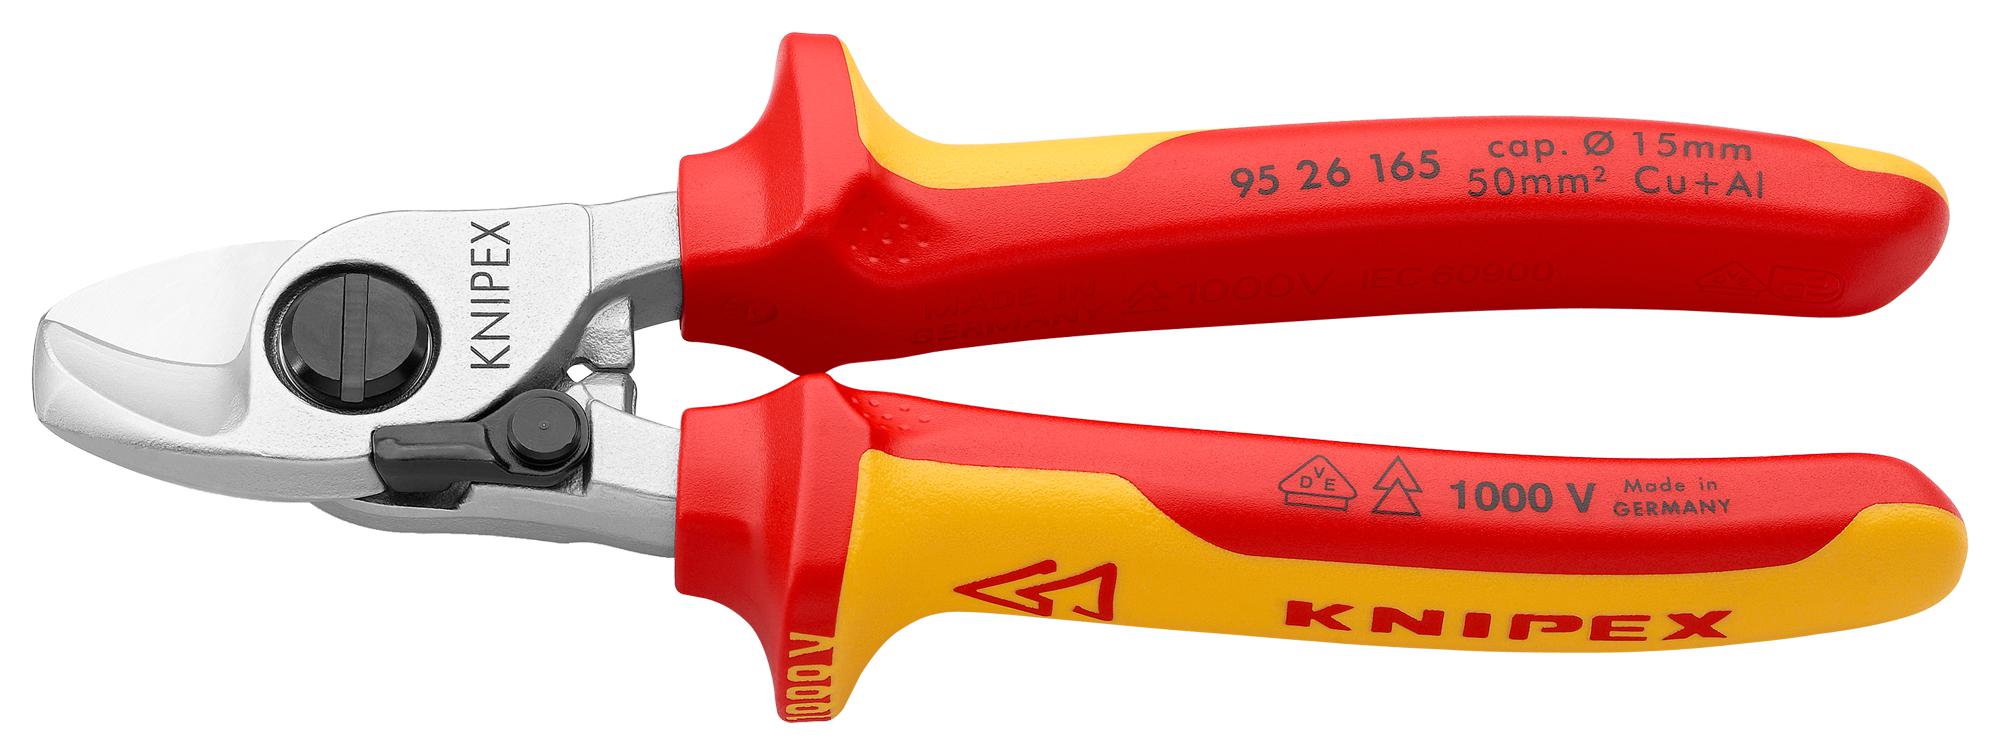 95 26 165 VDE CABLE SHEARS WITH OPENING SPRING KNIPEX